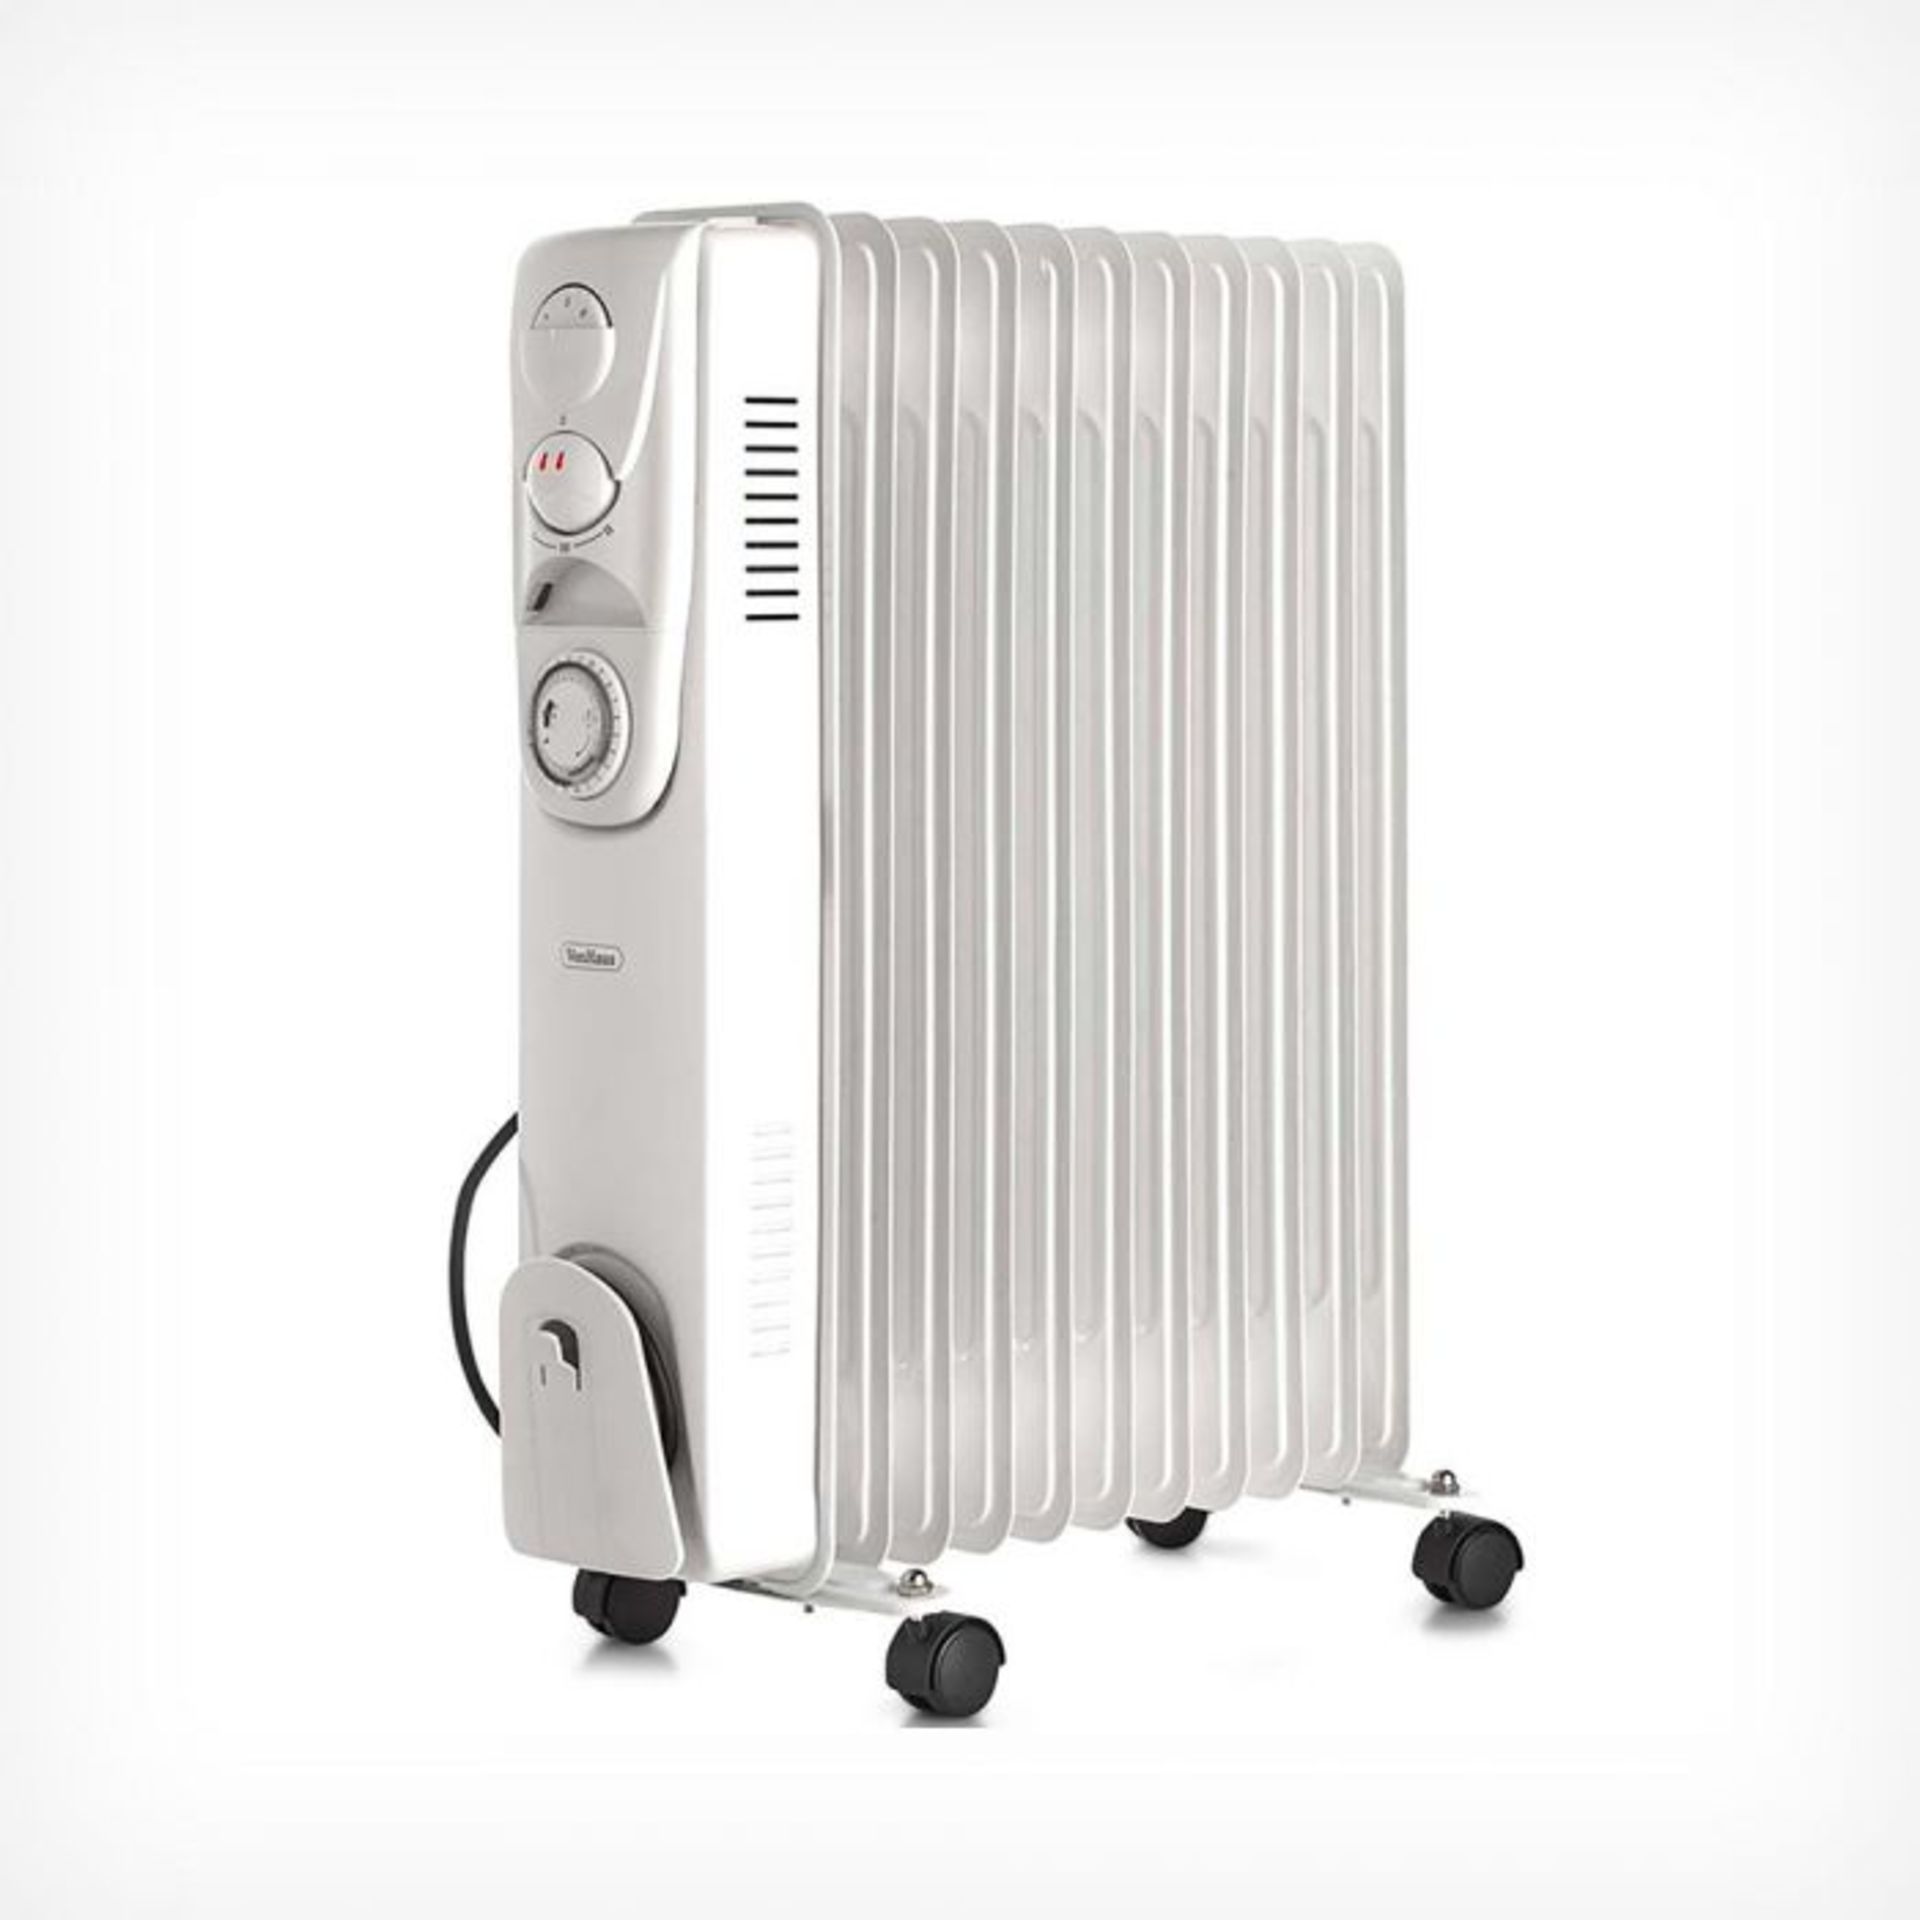 (S42) 11 Fin 2500W Oil Filled Radiator - White Suitable for areas up to 28 square metres 3 po... - Image 3 of 3